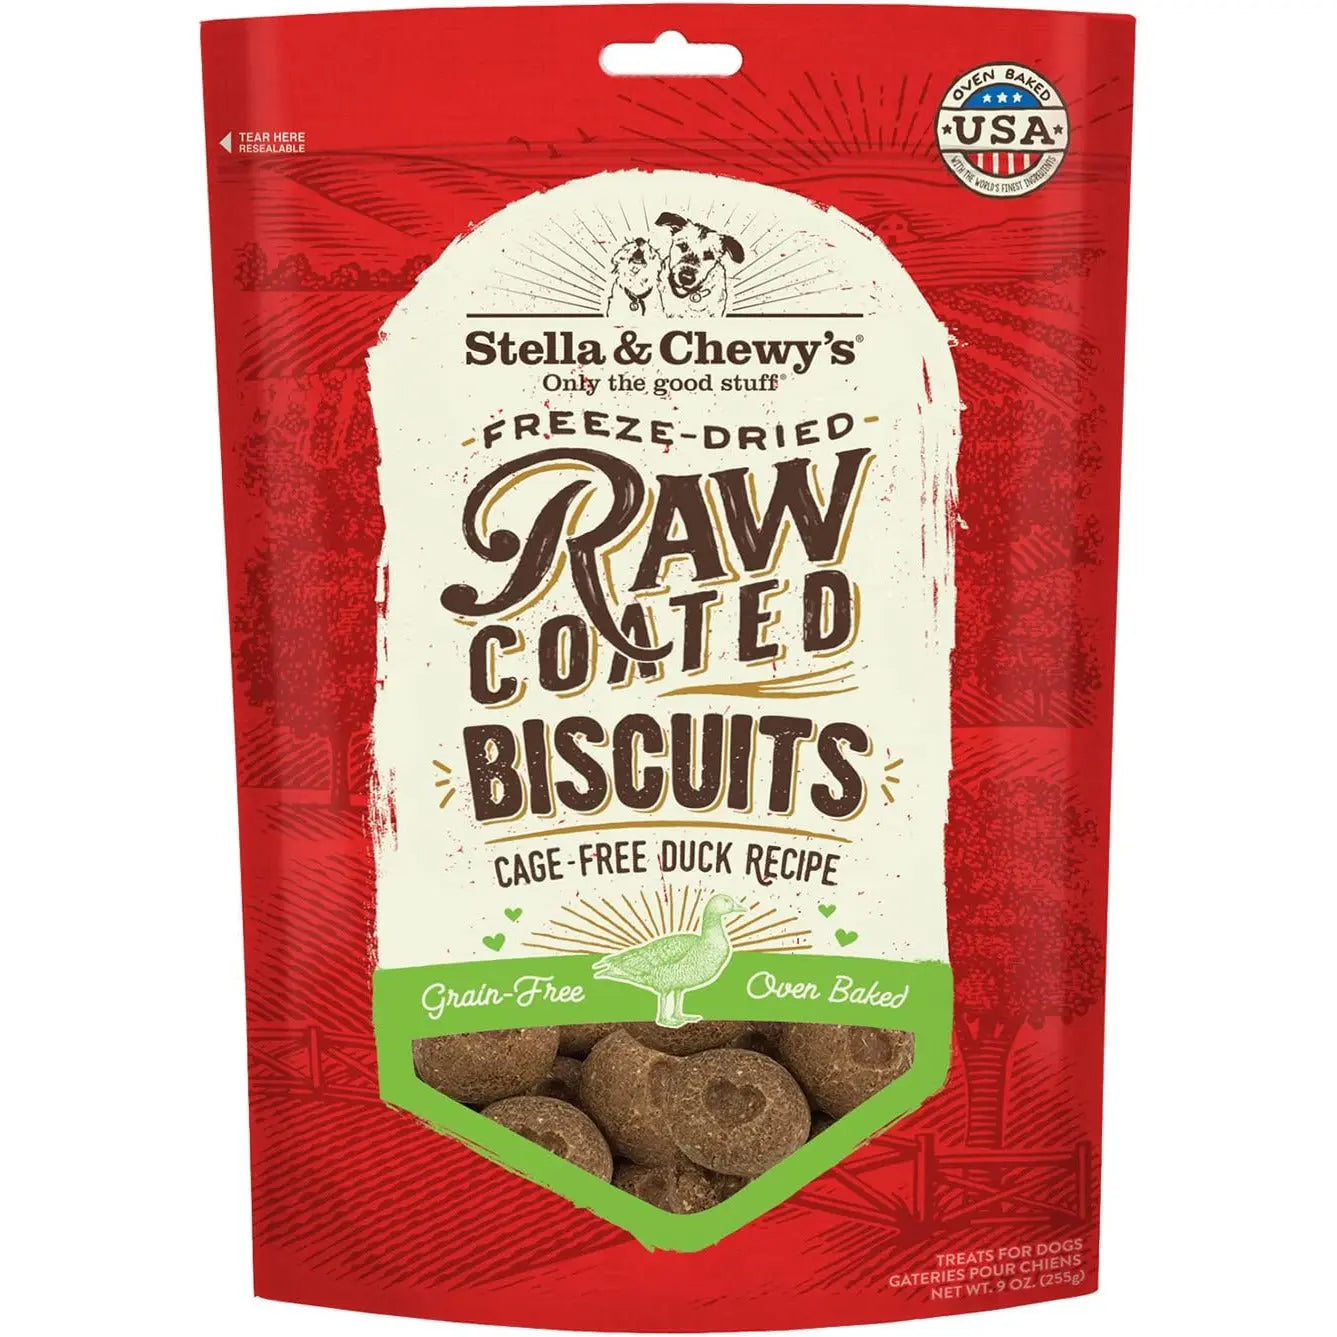 Stella & Chewys Dogs Raw Coated Biscuits Dog Treata 9Oz Stella & Chewy's